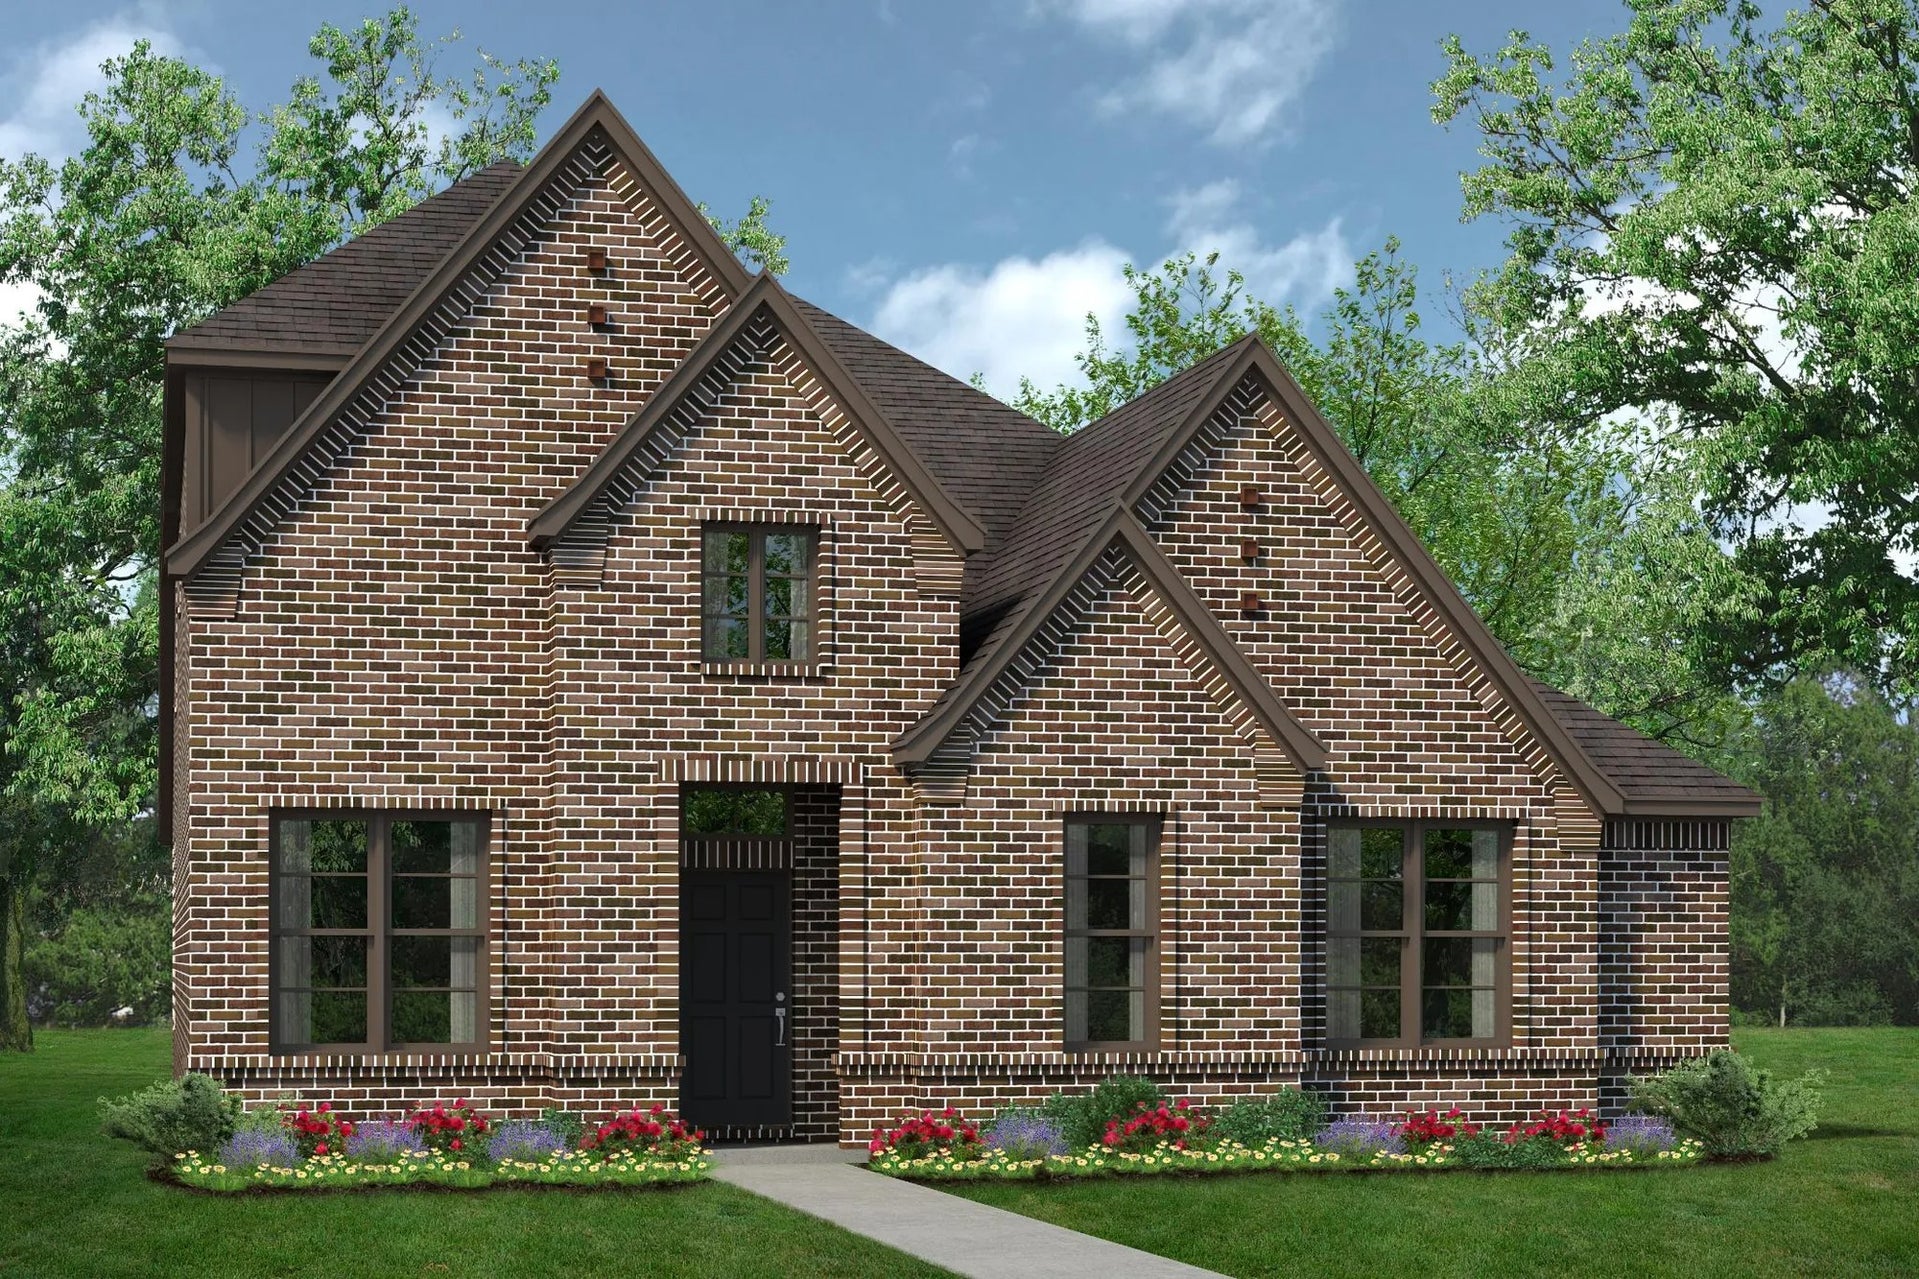 2795 C. Concept 2795 Home with 3 Bedrooms